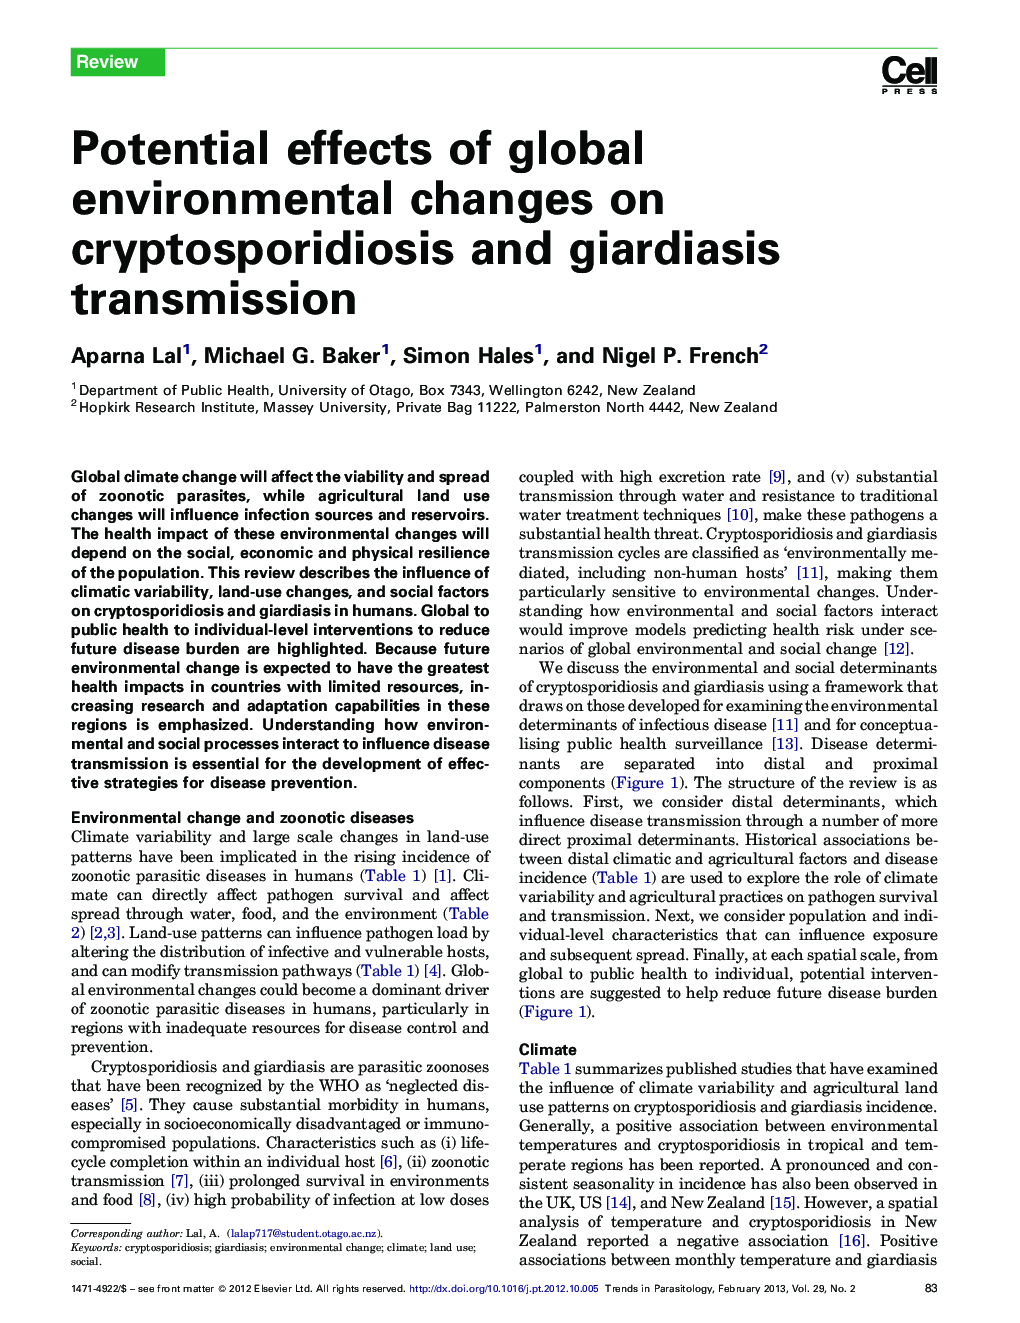 Potential effects of global environmental changes on cryptosporidiosis and giardiasis transmission